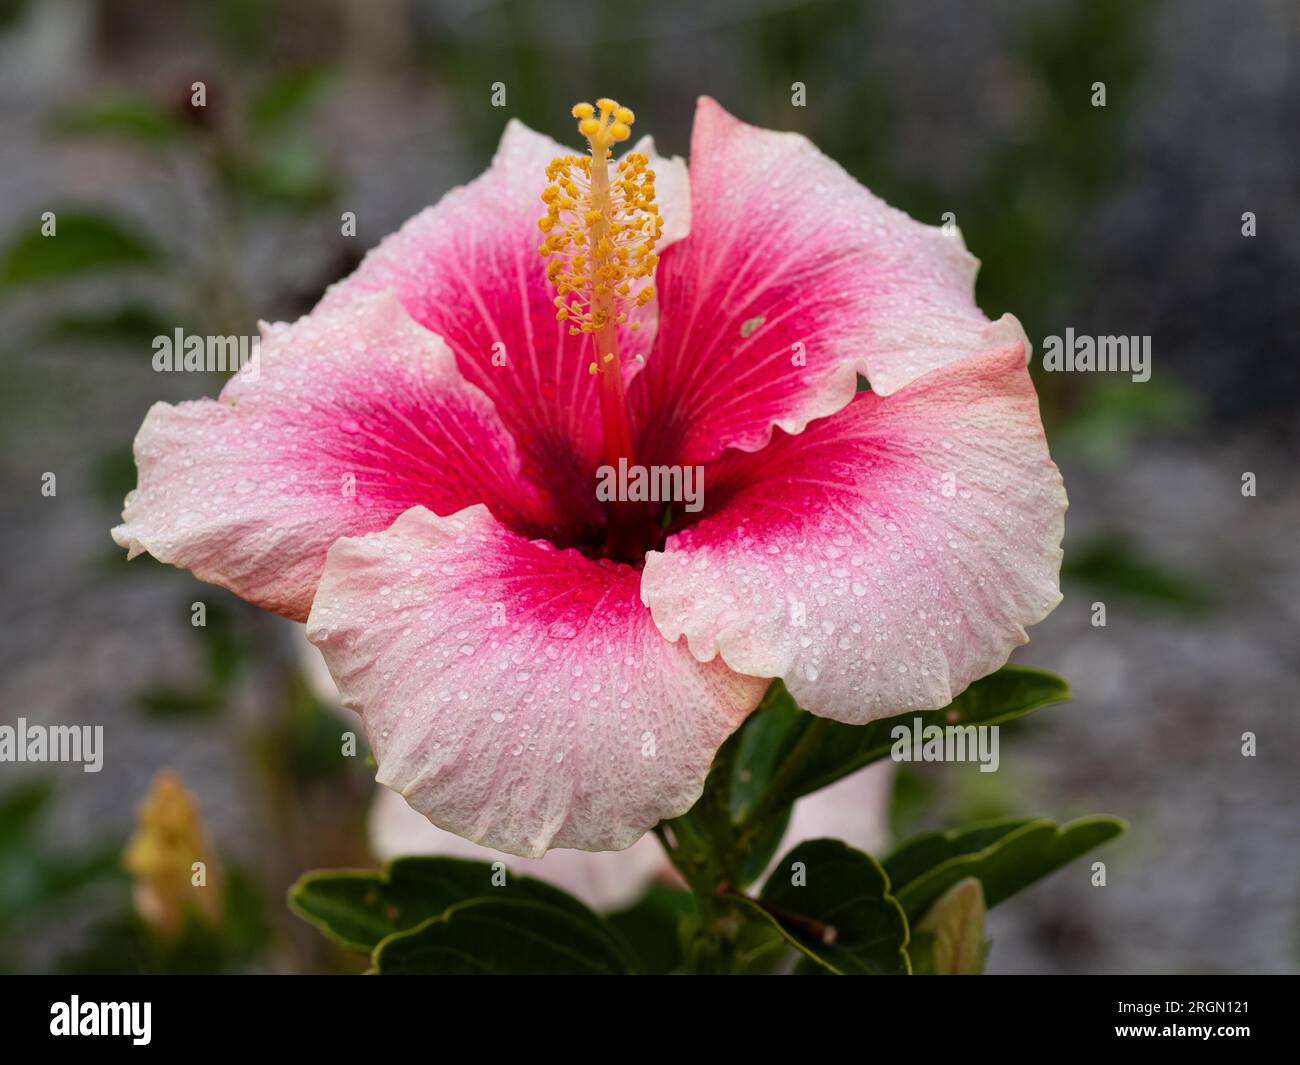 Hibiscus flower with large petals in two shades of pink, with frilly edges and yellow stamens Stock Photo